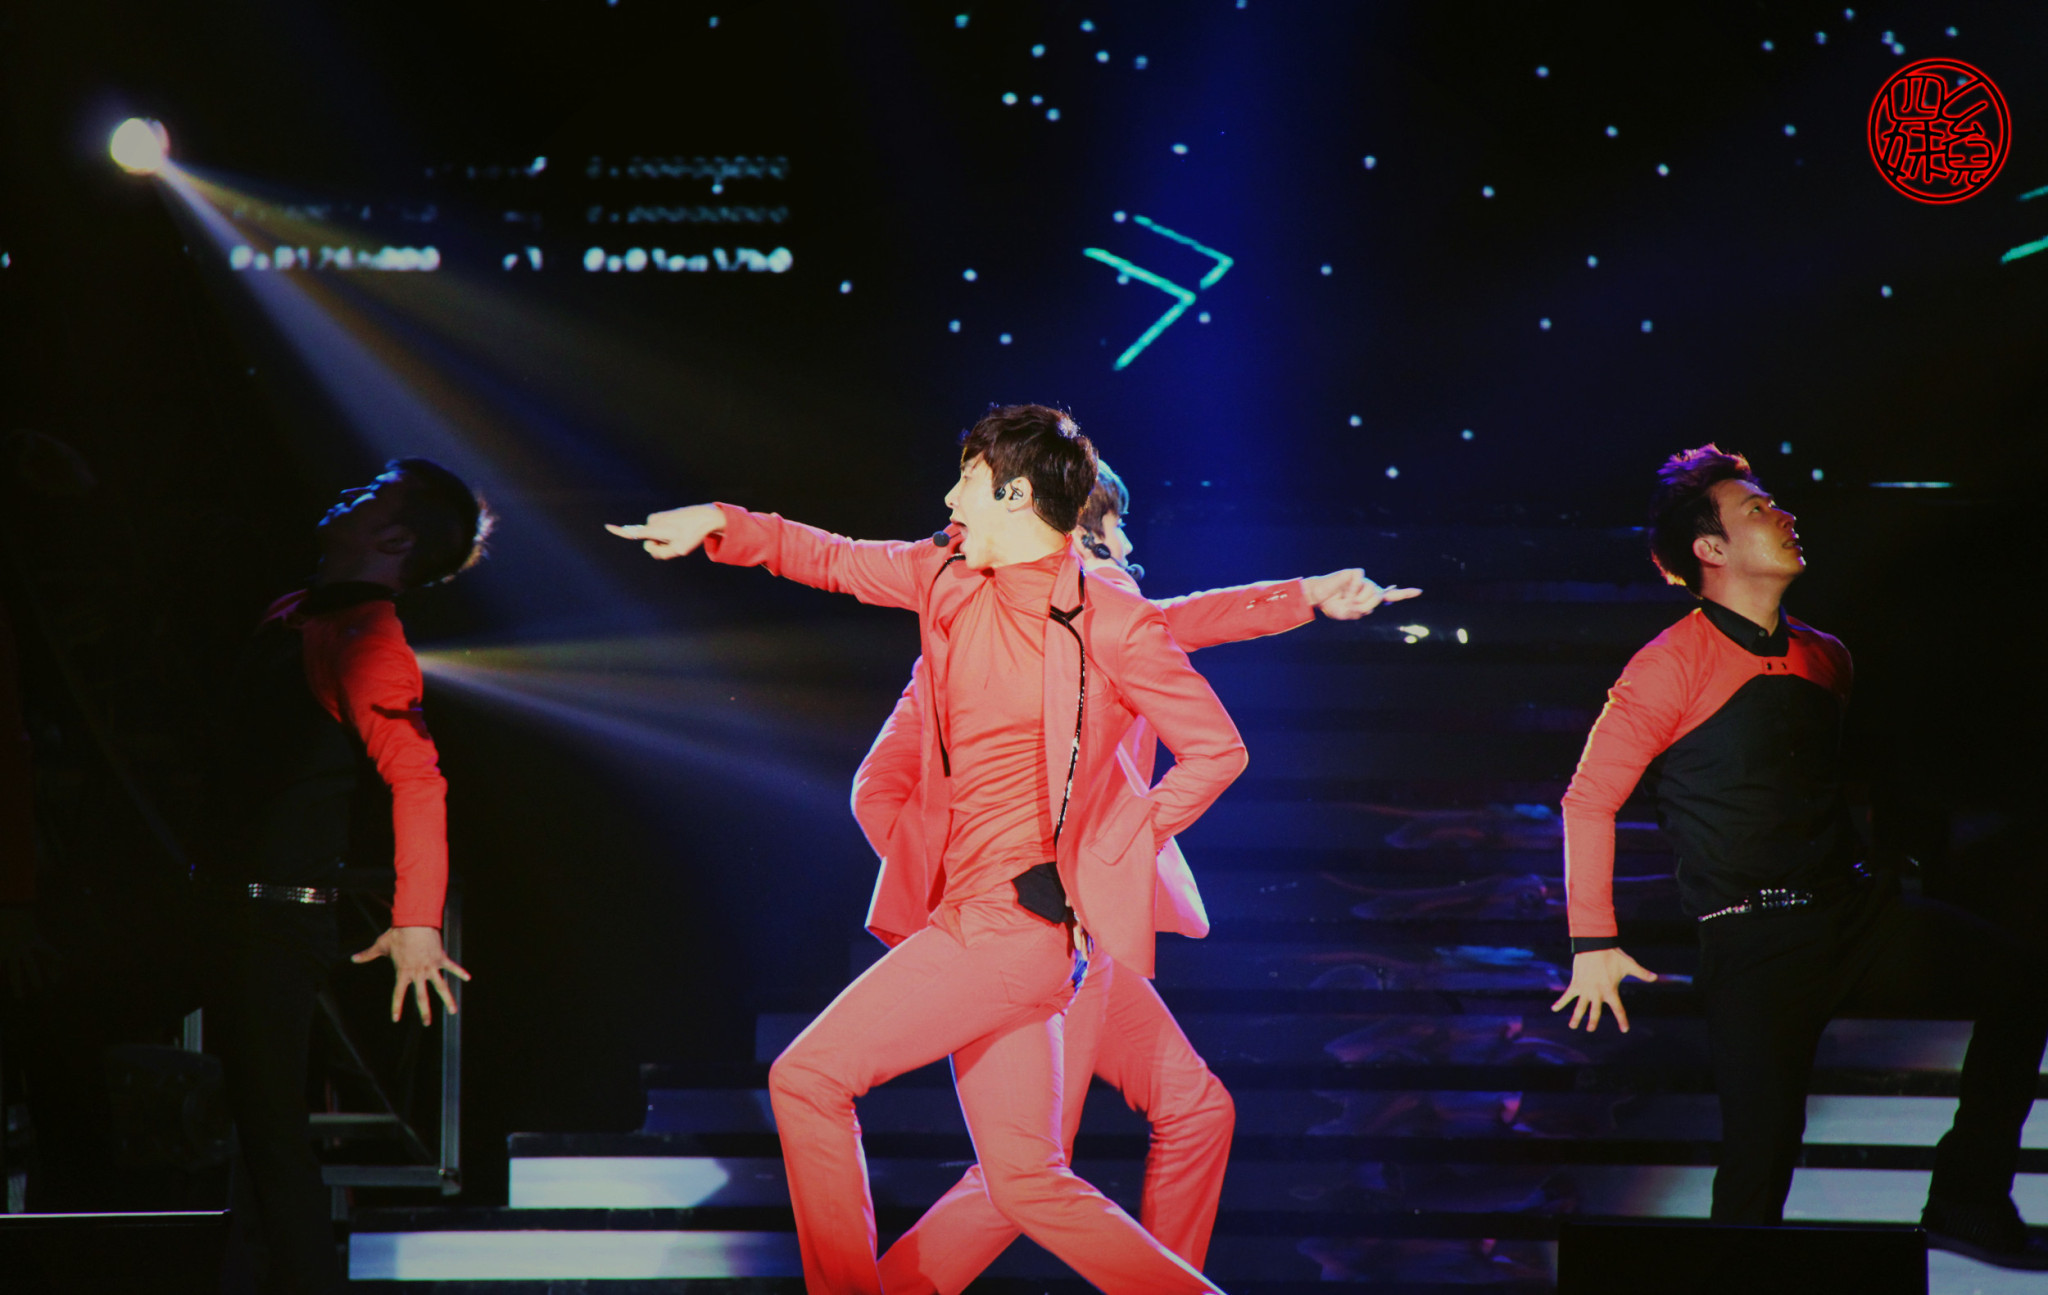 [22.12.12][Pics] TVXQ - Sichuan TV New Year's Eve Concert A738e4628c4fa3d8e3e48add9a02ef8d_dthEXjh9vqeR49Nr2ClKJ6V8lXit4Rw